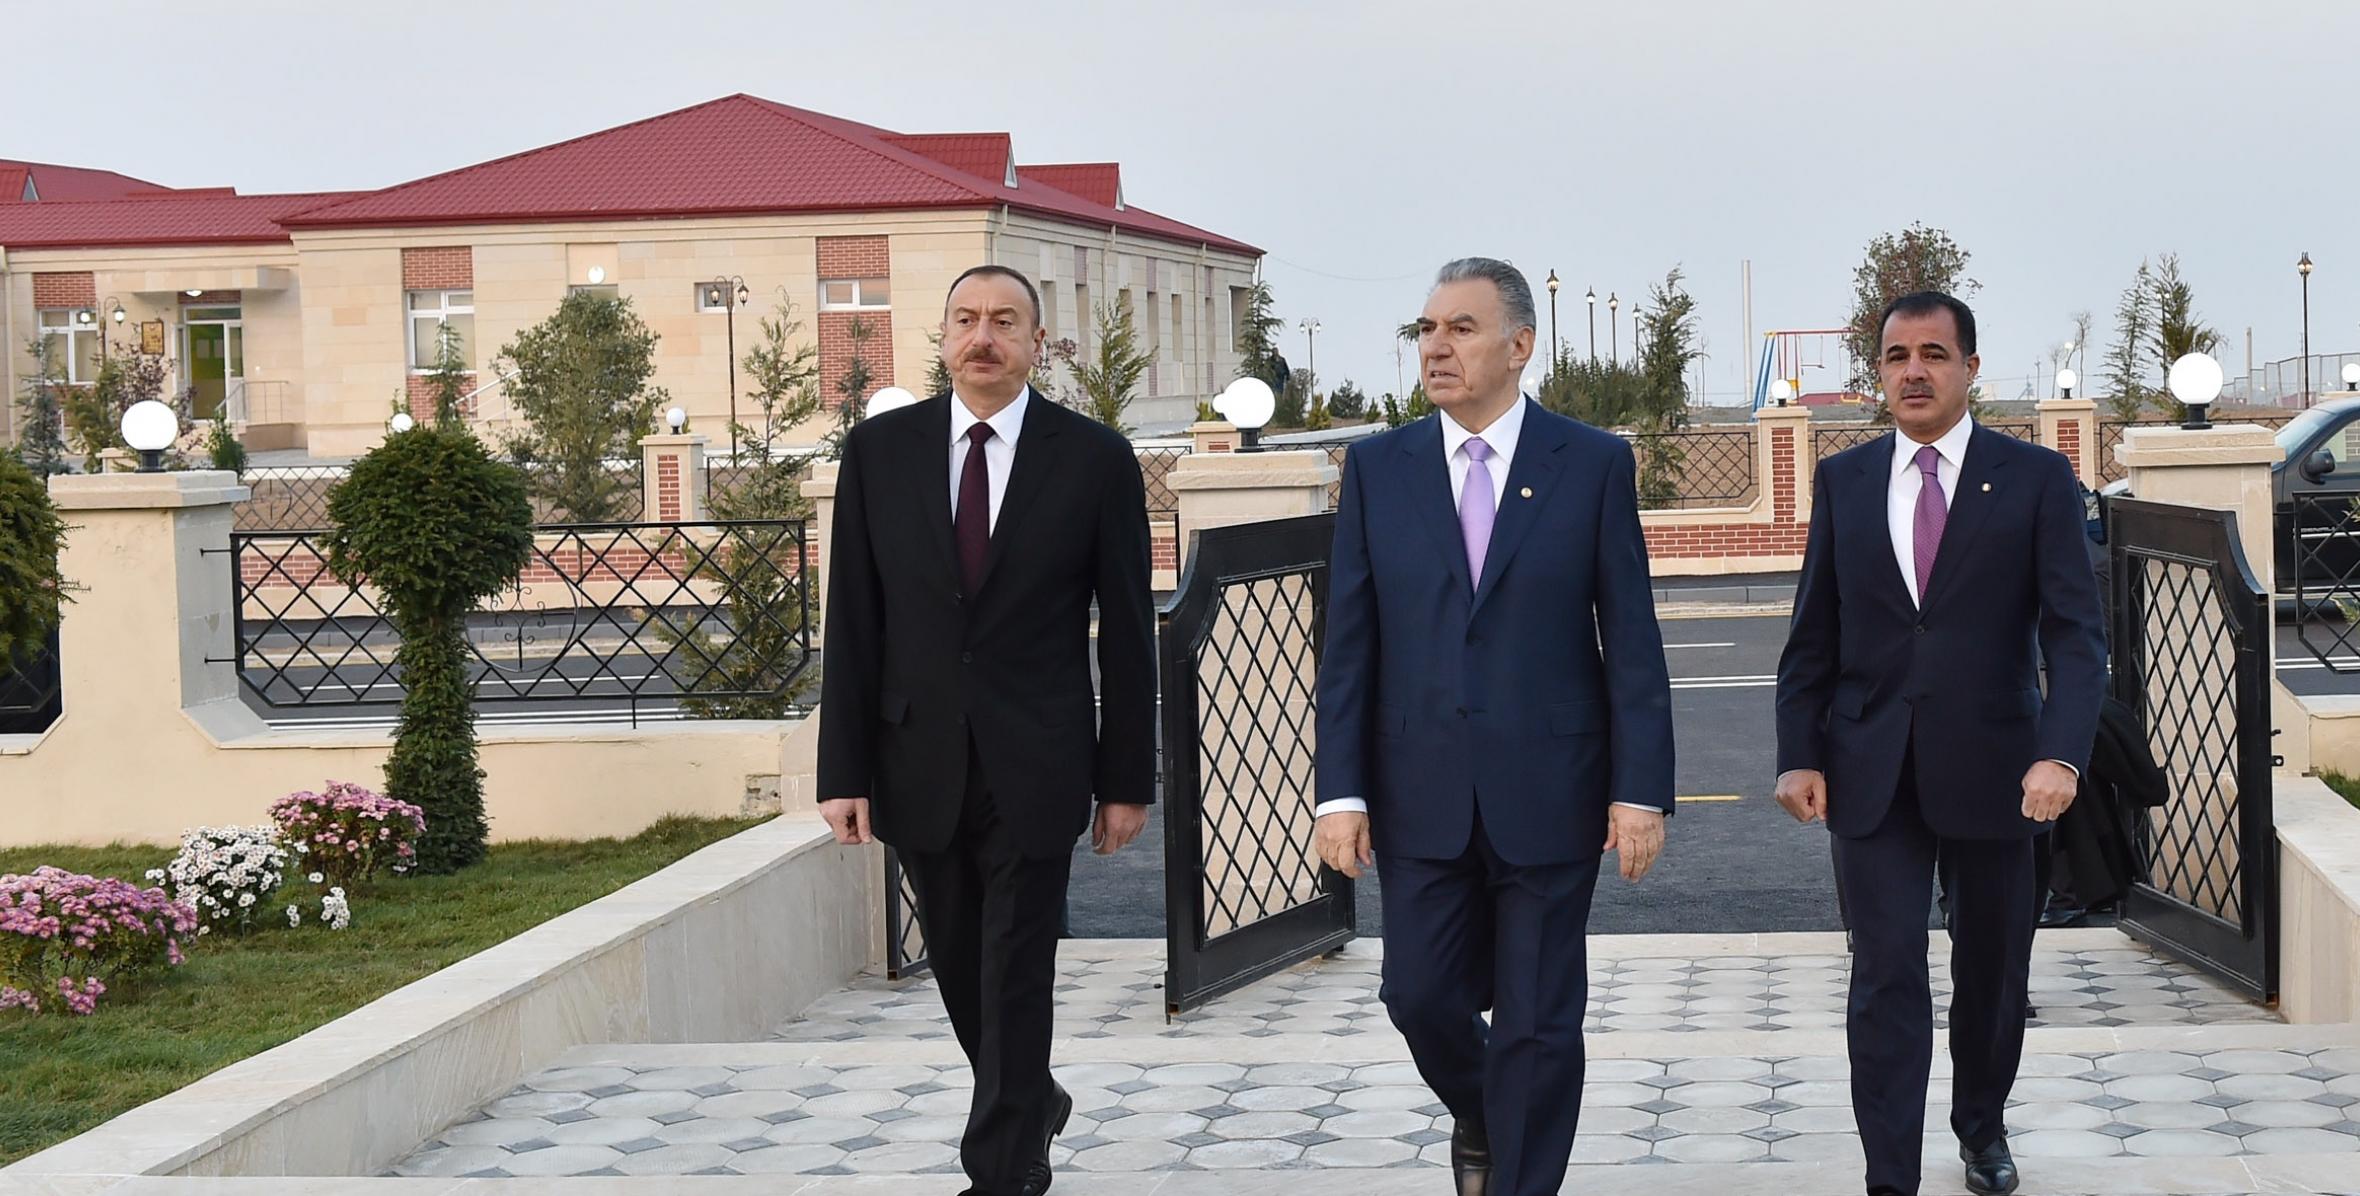 Ilham Aliyev attended the opening of a new IDP settlement in Ganja